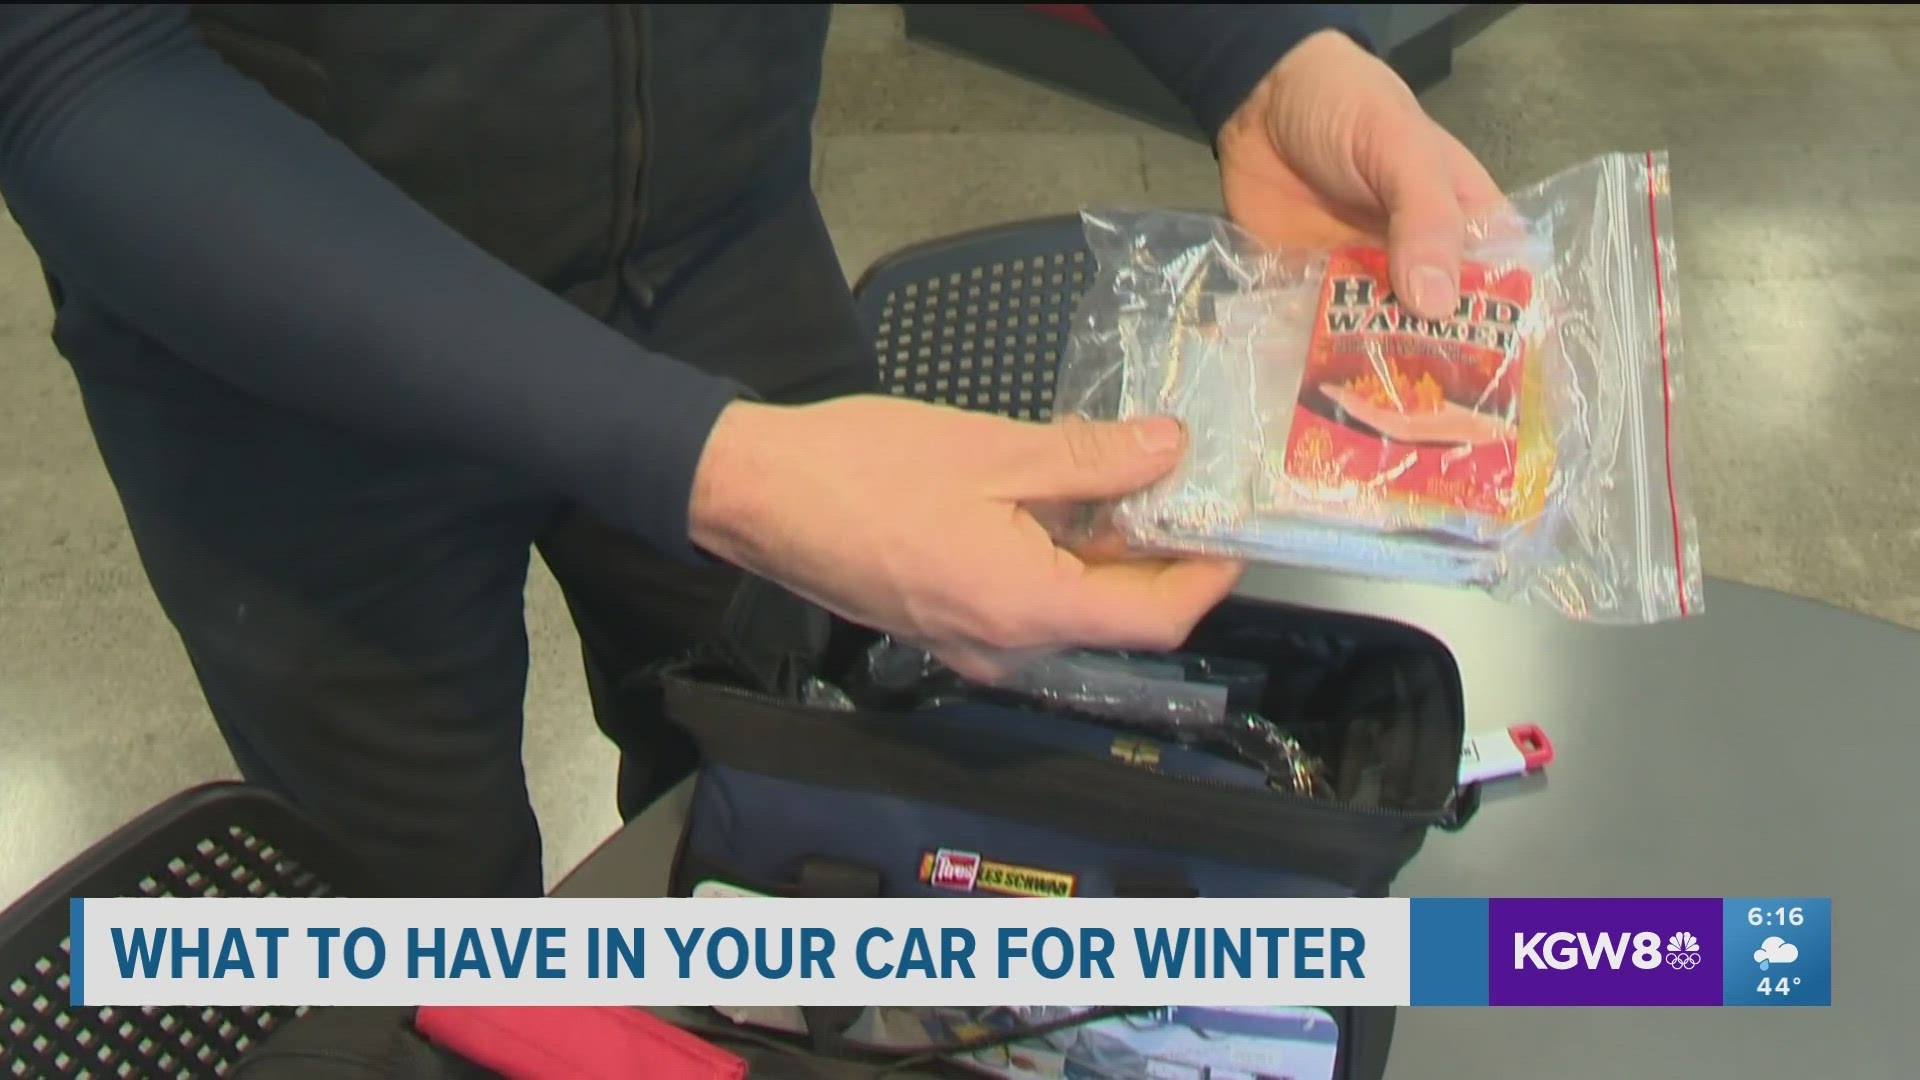 KGW meteorologist Joe Raineri walks drivers through what to pack in your car's emergency kit, even if you're not heading up into the mountains.